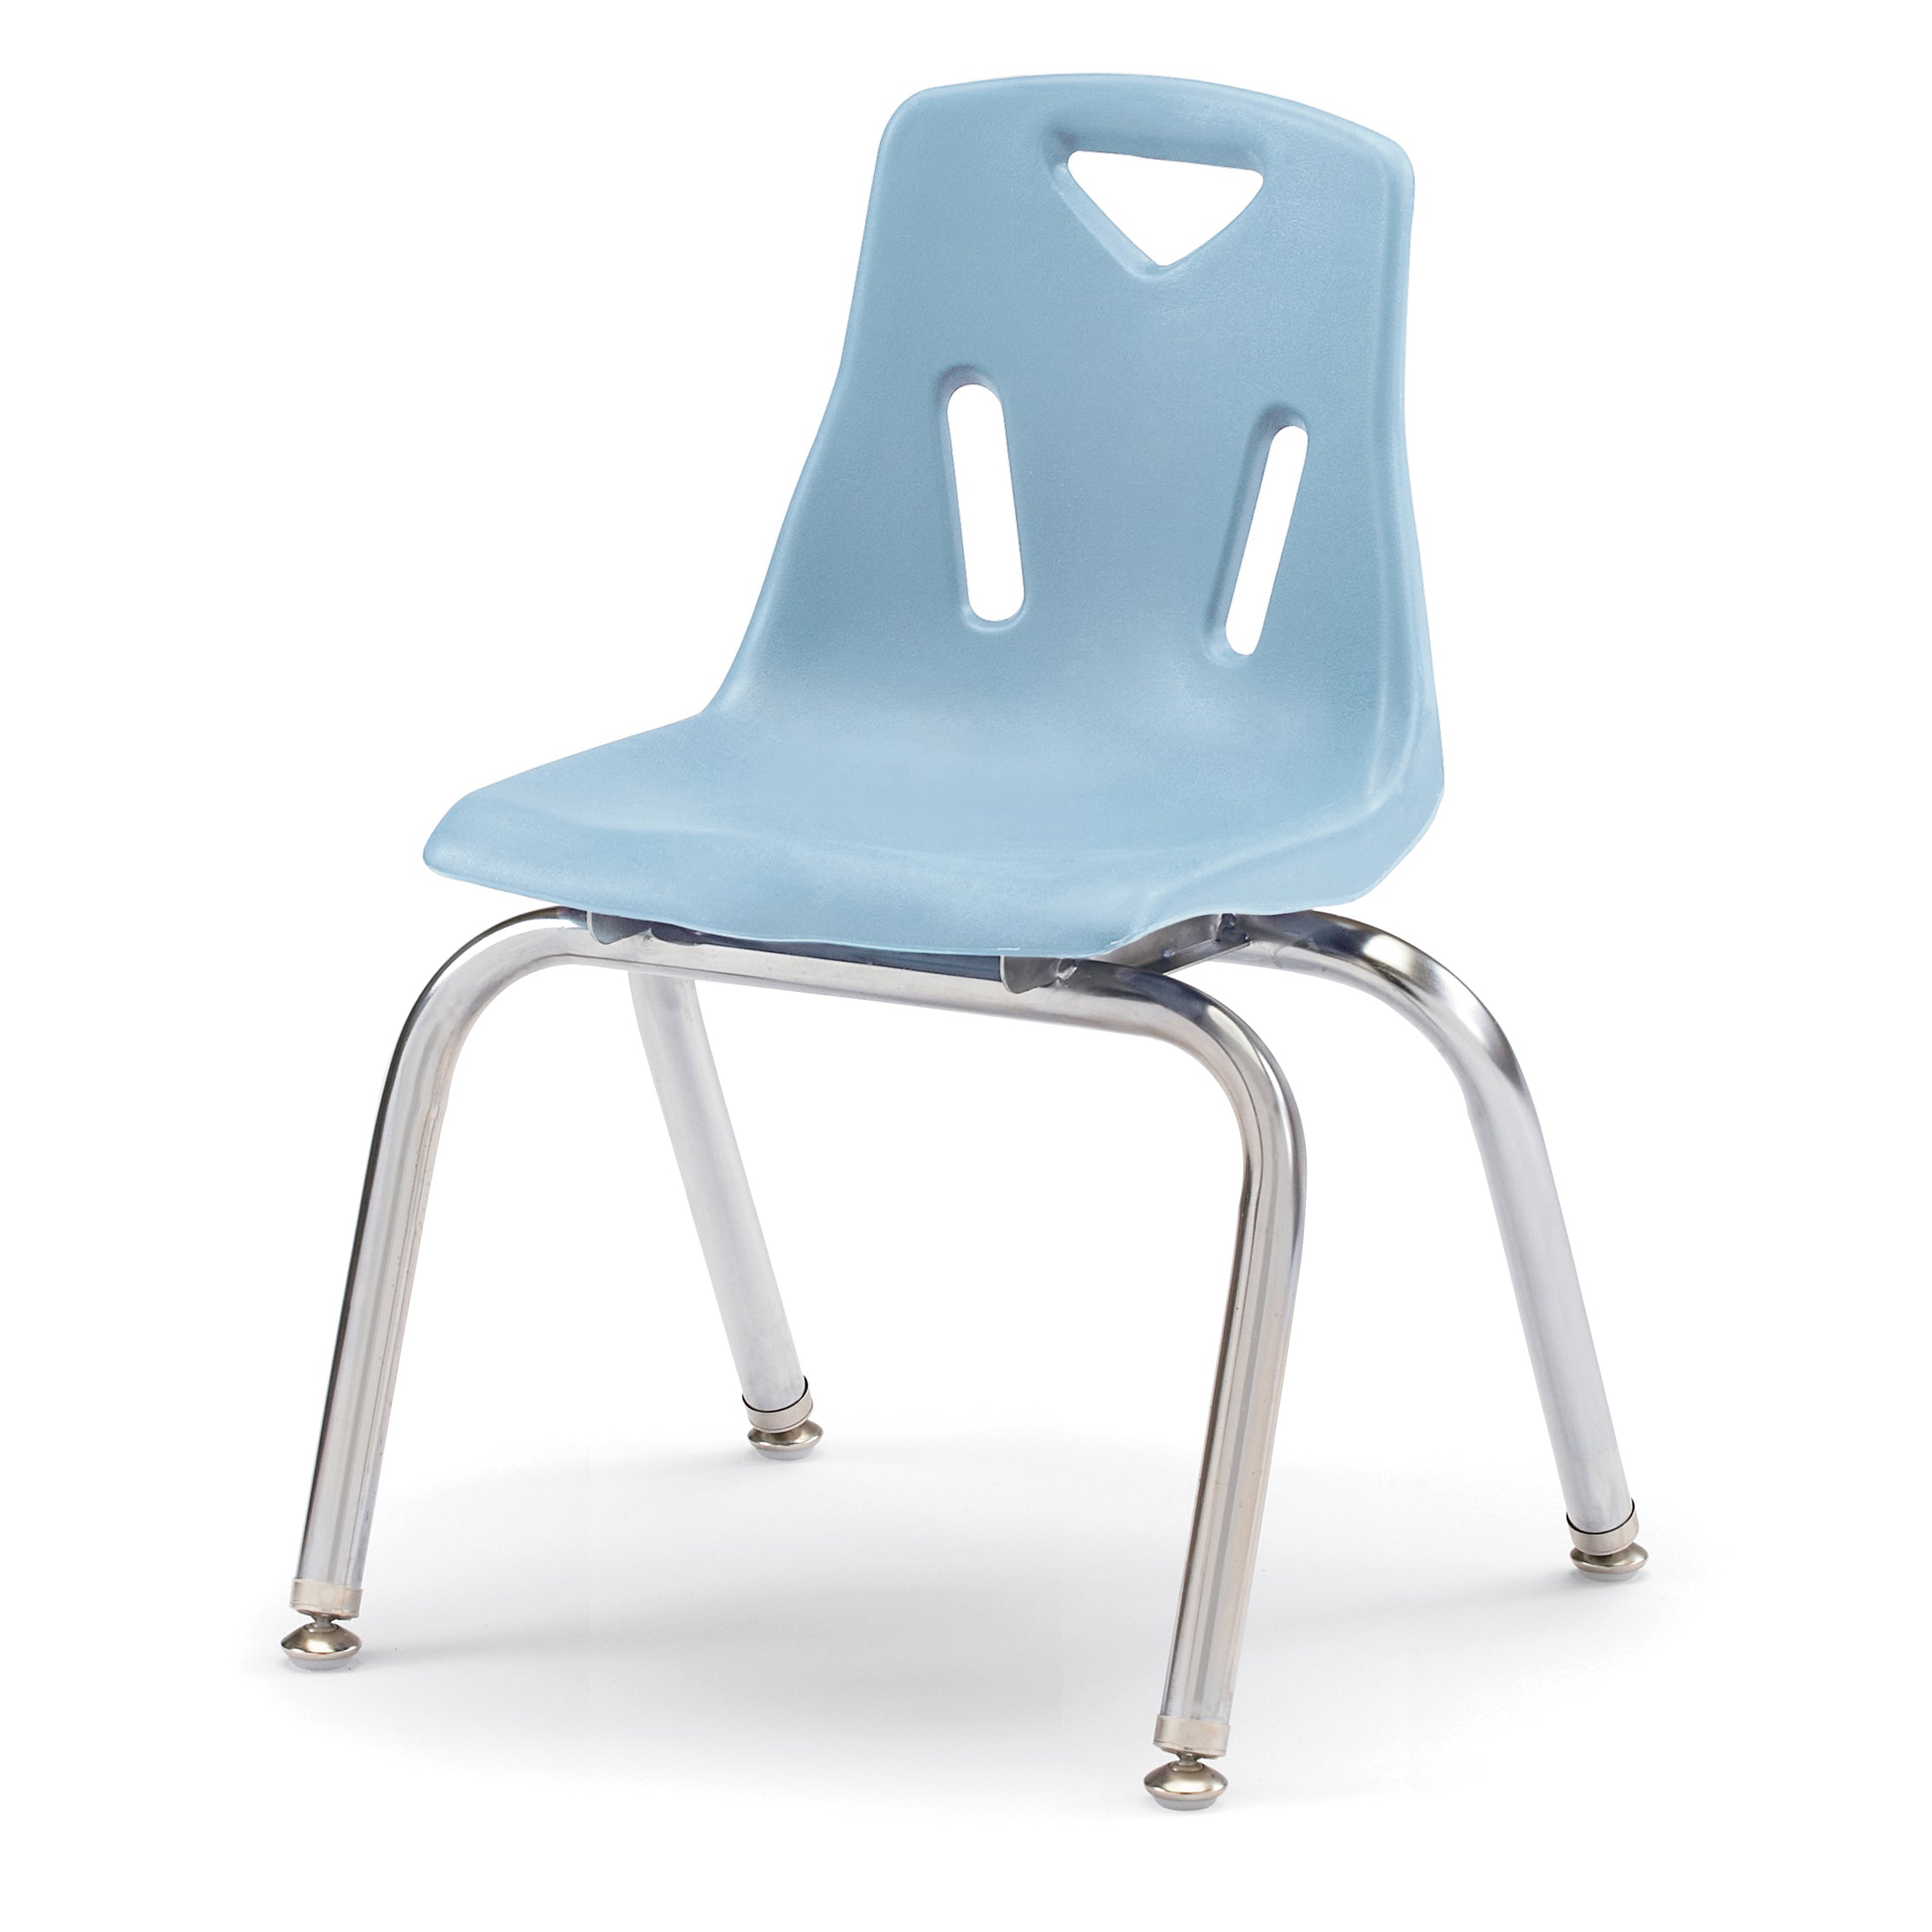 8144JC6131, Berries Stacking Chair with Chrome-Plated Legs - 14" Ht - Set of 6 - Coastal Blue